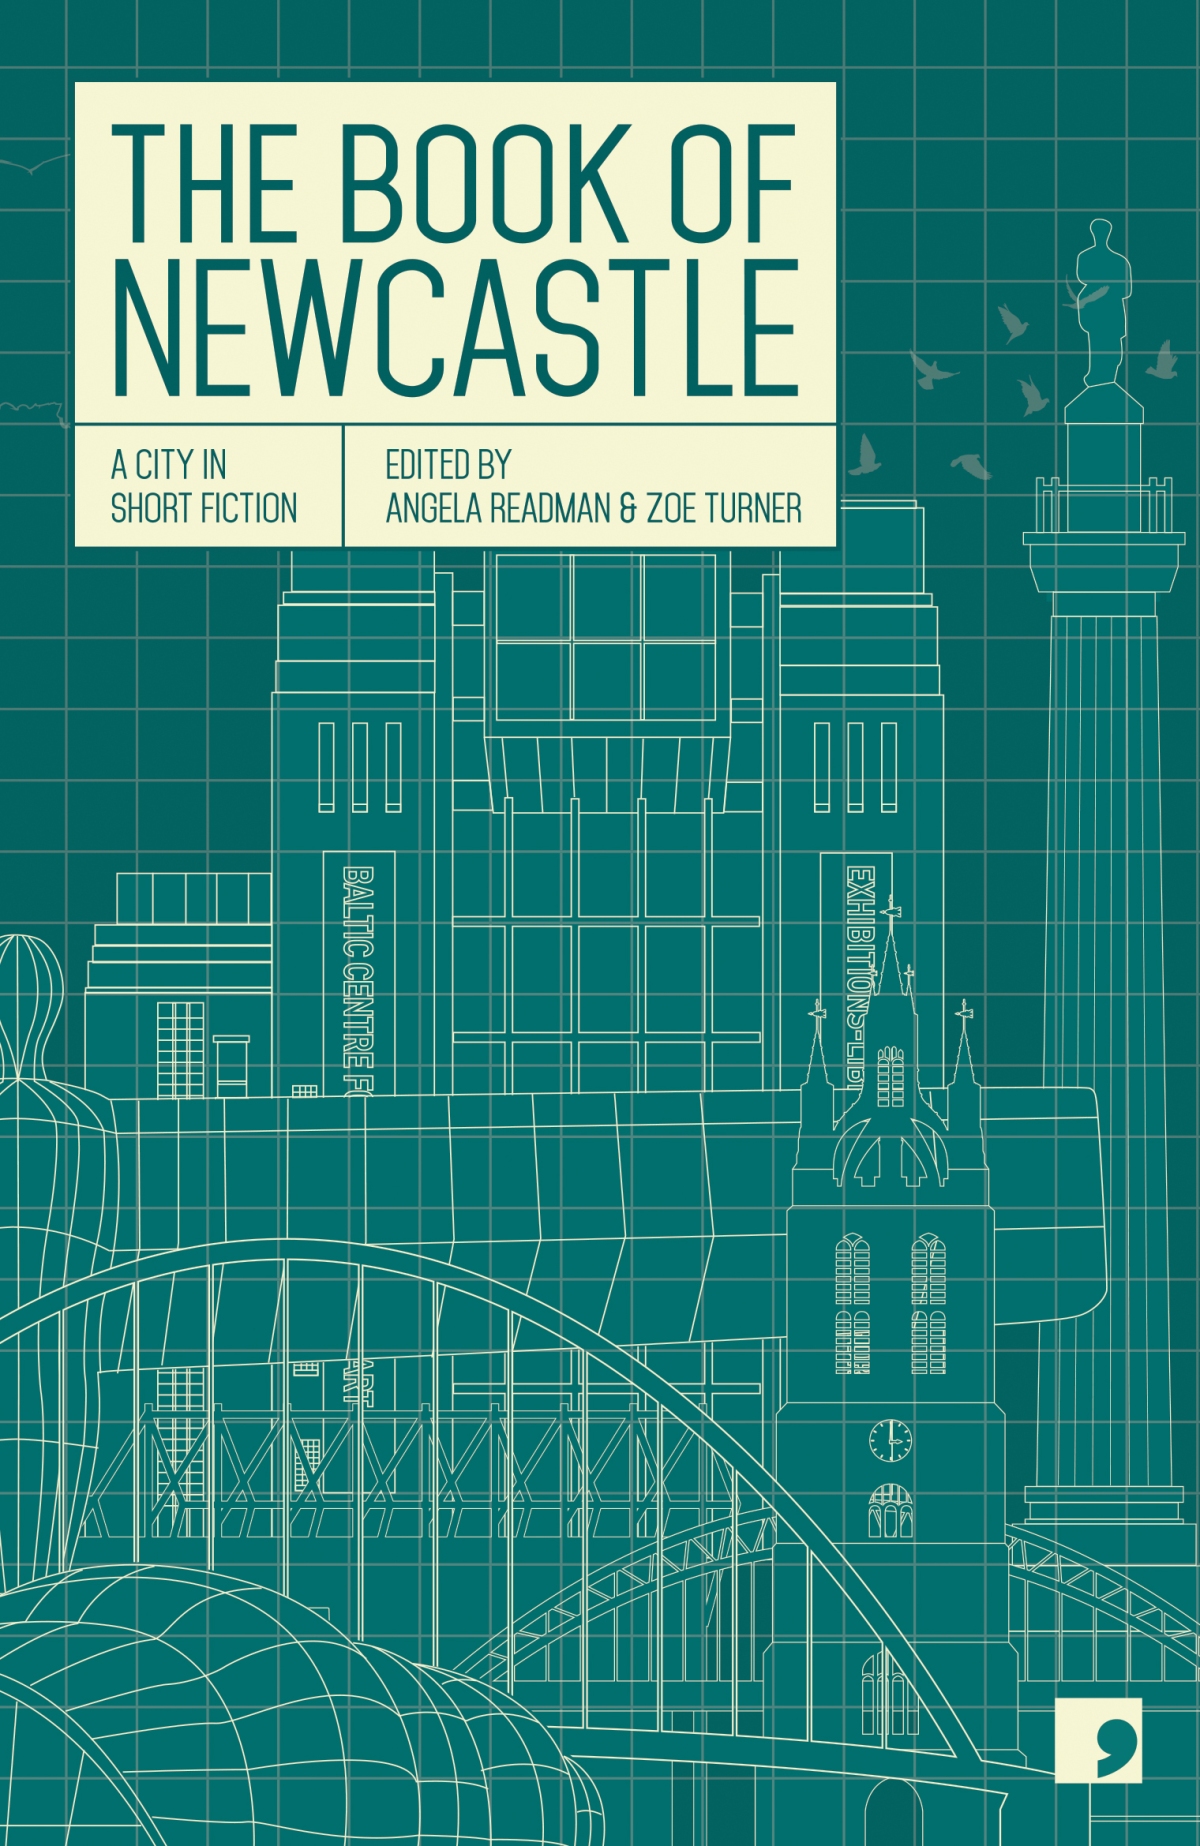 Launching The Book of Newcastle with Comma Press